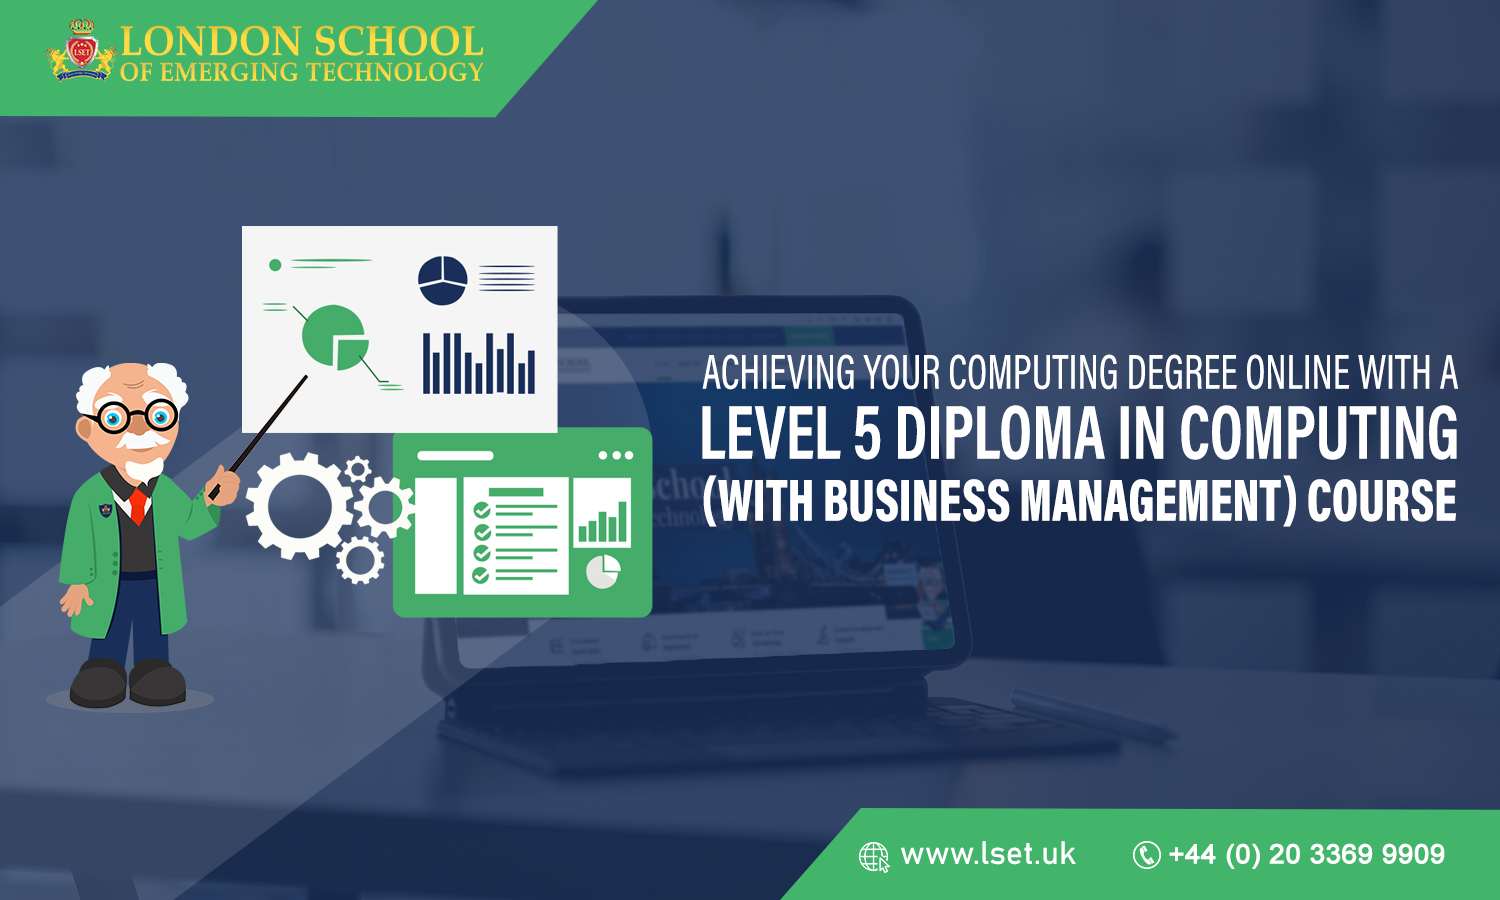 Achieving Your Computing Degree Online with a Level 5 Diploma in Computing (with Business Management) Course